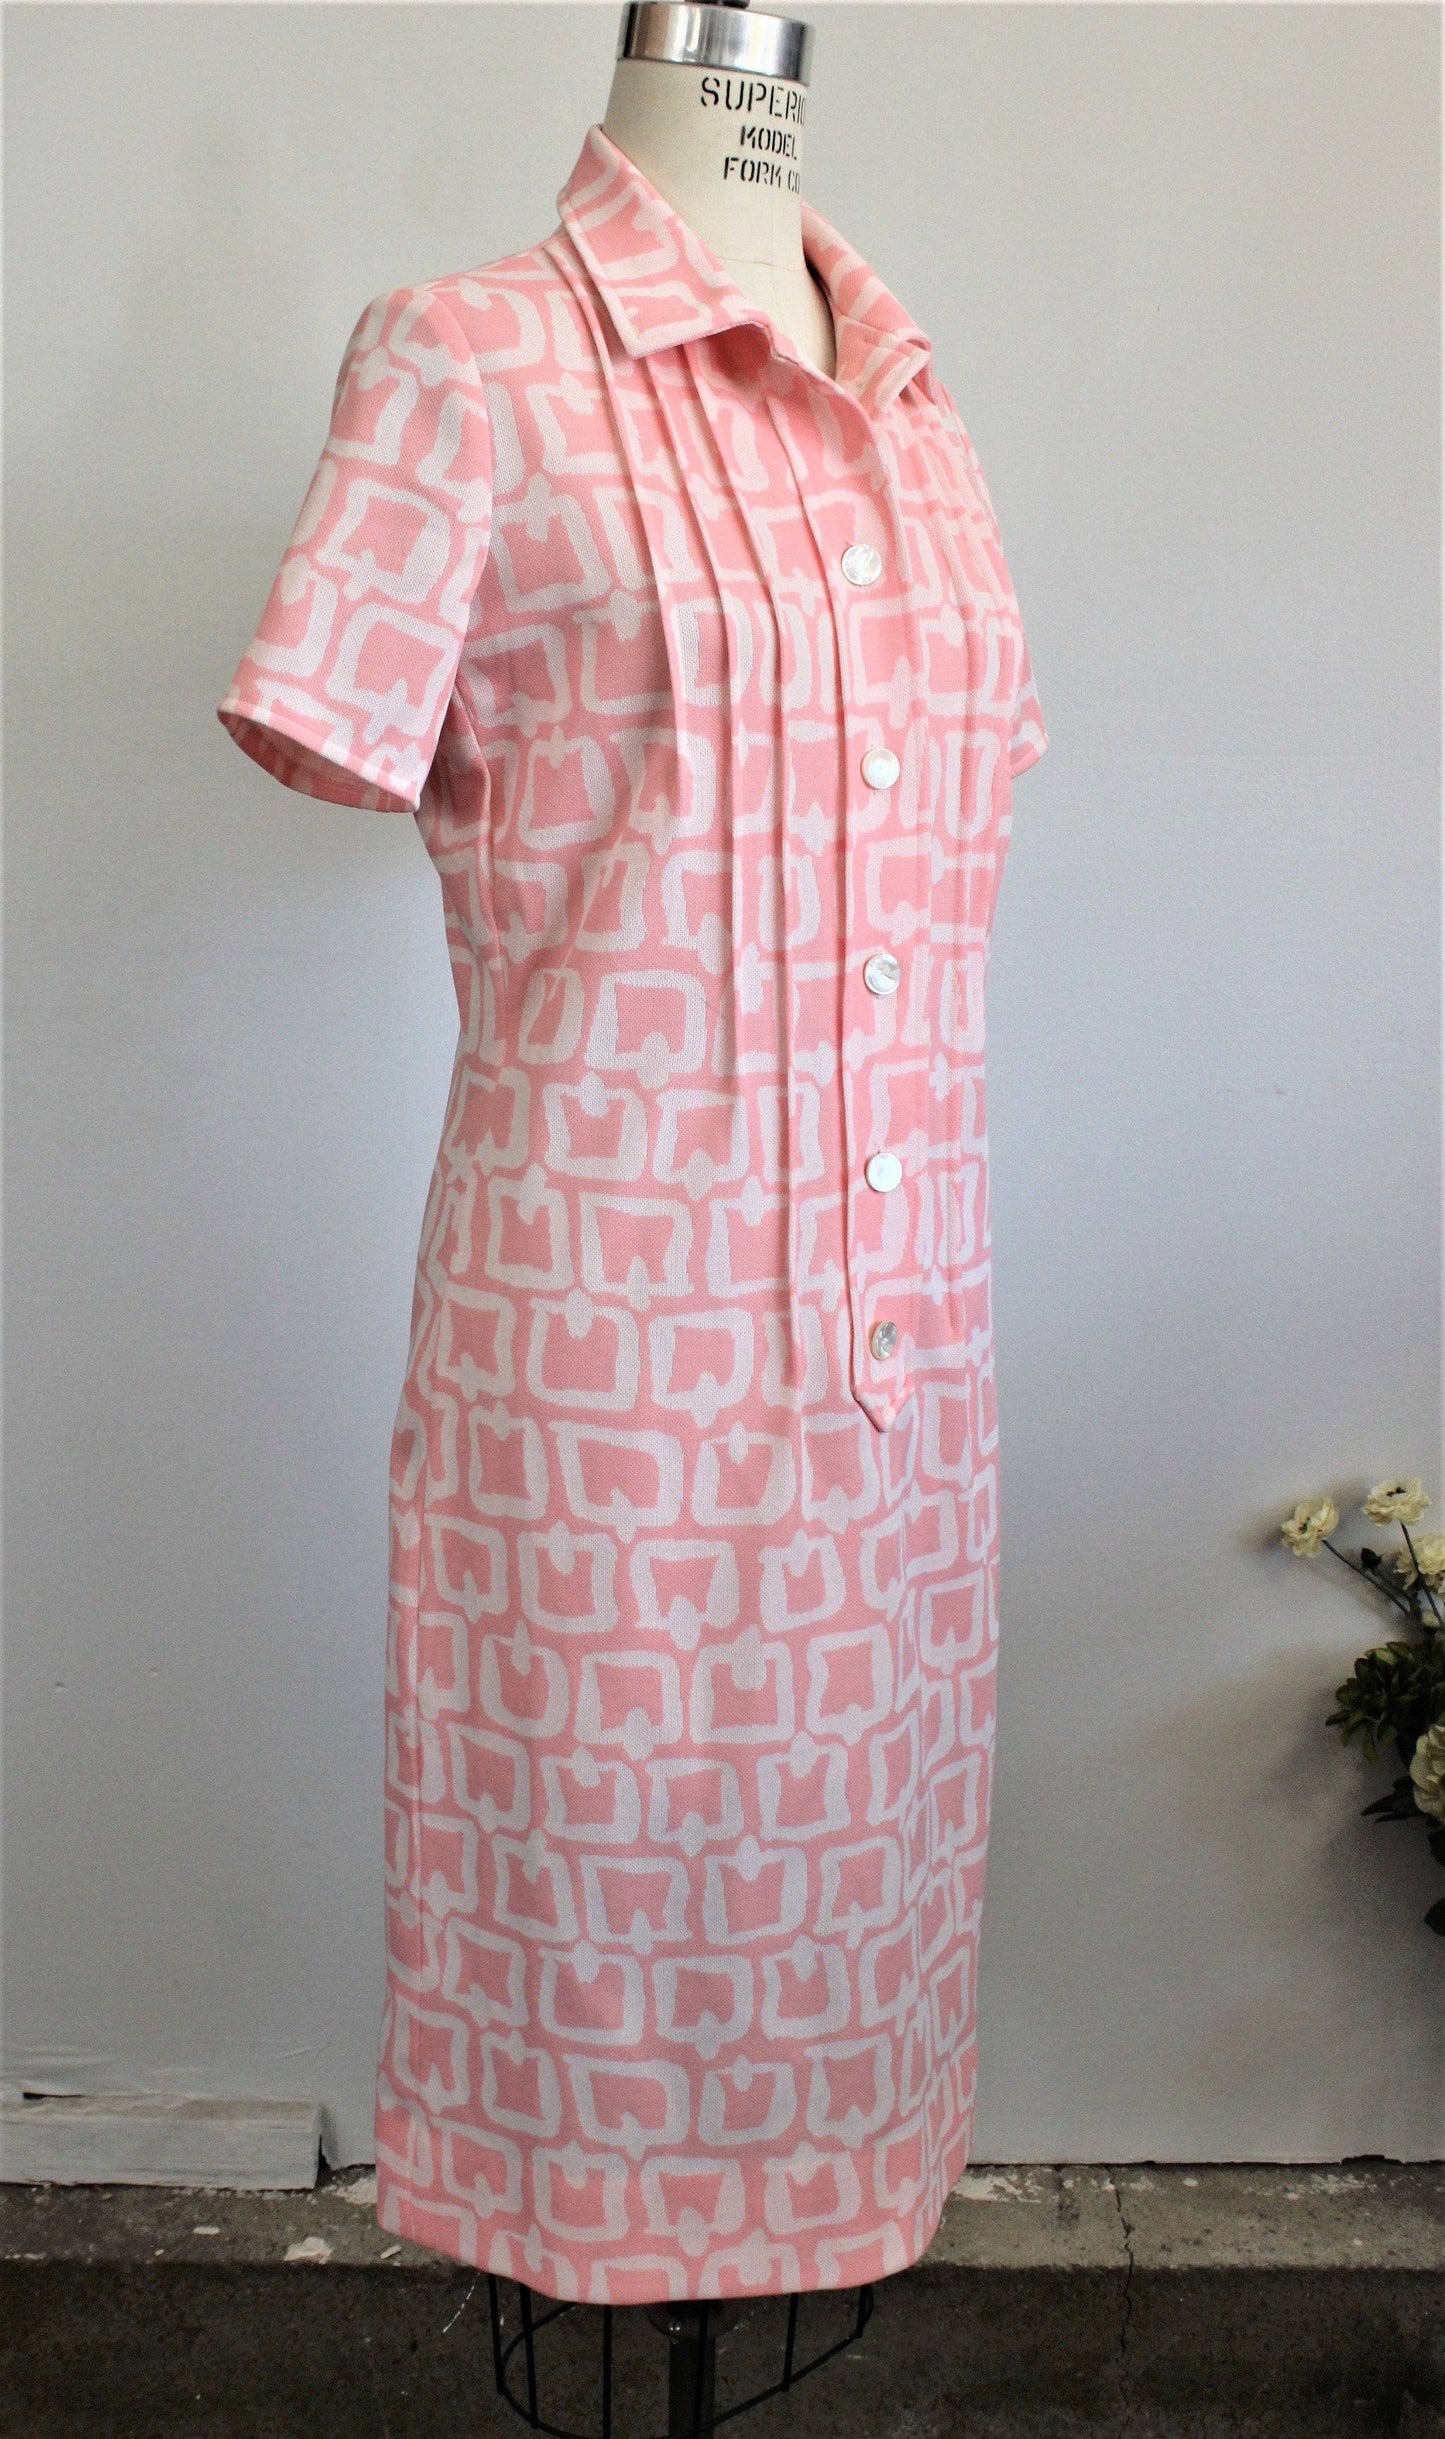 Vintage 1960s Pink And White Knit Mod Dress-Toadstool Farm Vintage-1960s Dress,1960s Mod Dress,Geometric Print,Kmit Dress,Pik and White,Vintage,Vintage Clothing,Vintage Dress,Vintage Dresses